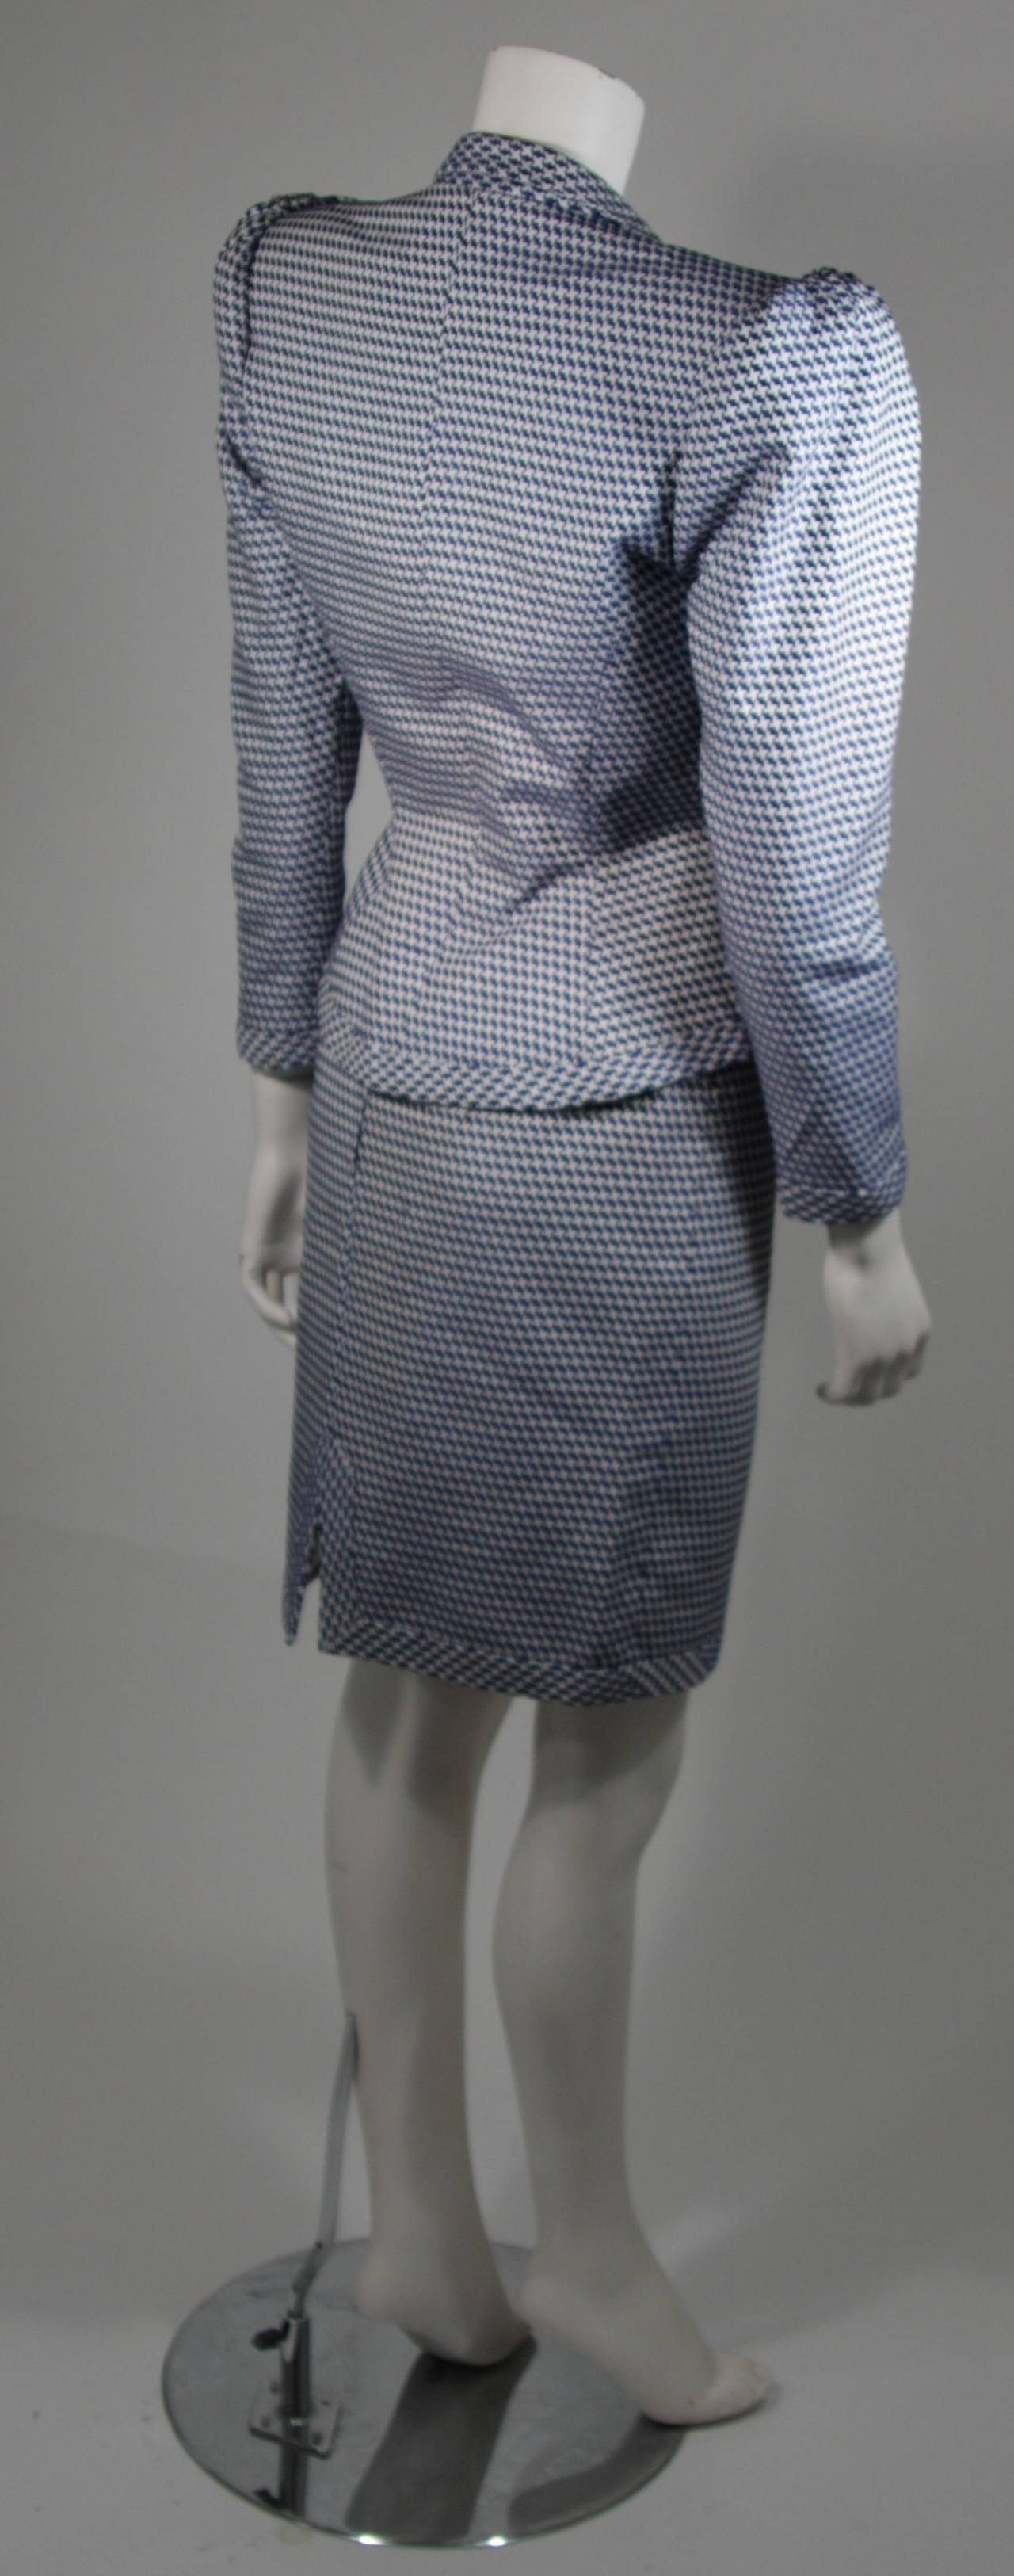 Women's Leon Paule Sculptural Royal Blue & White Fitted Houndstooth Jacket & Skirt Suit